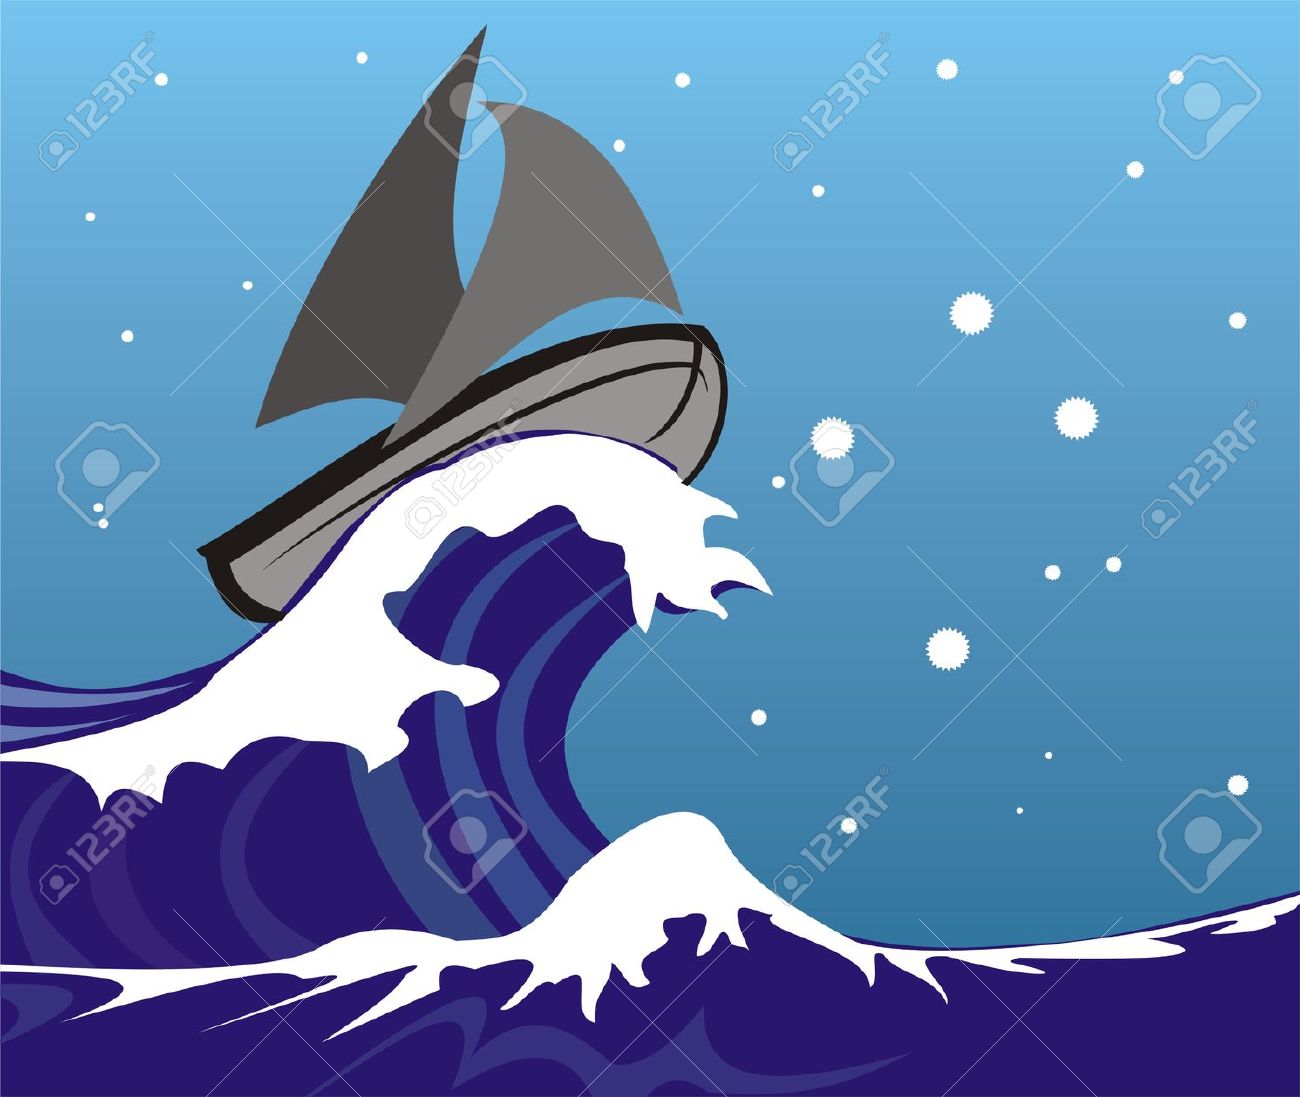 clipart ship in storm - photo #27